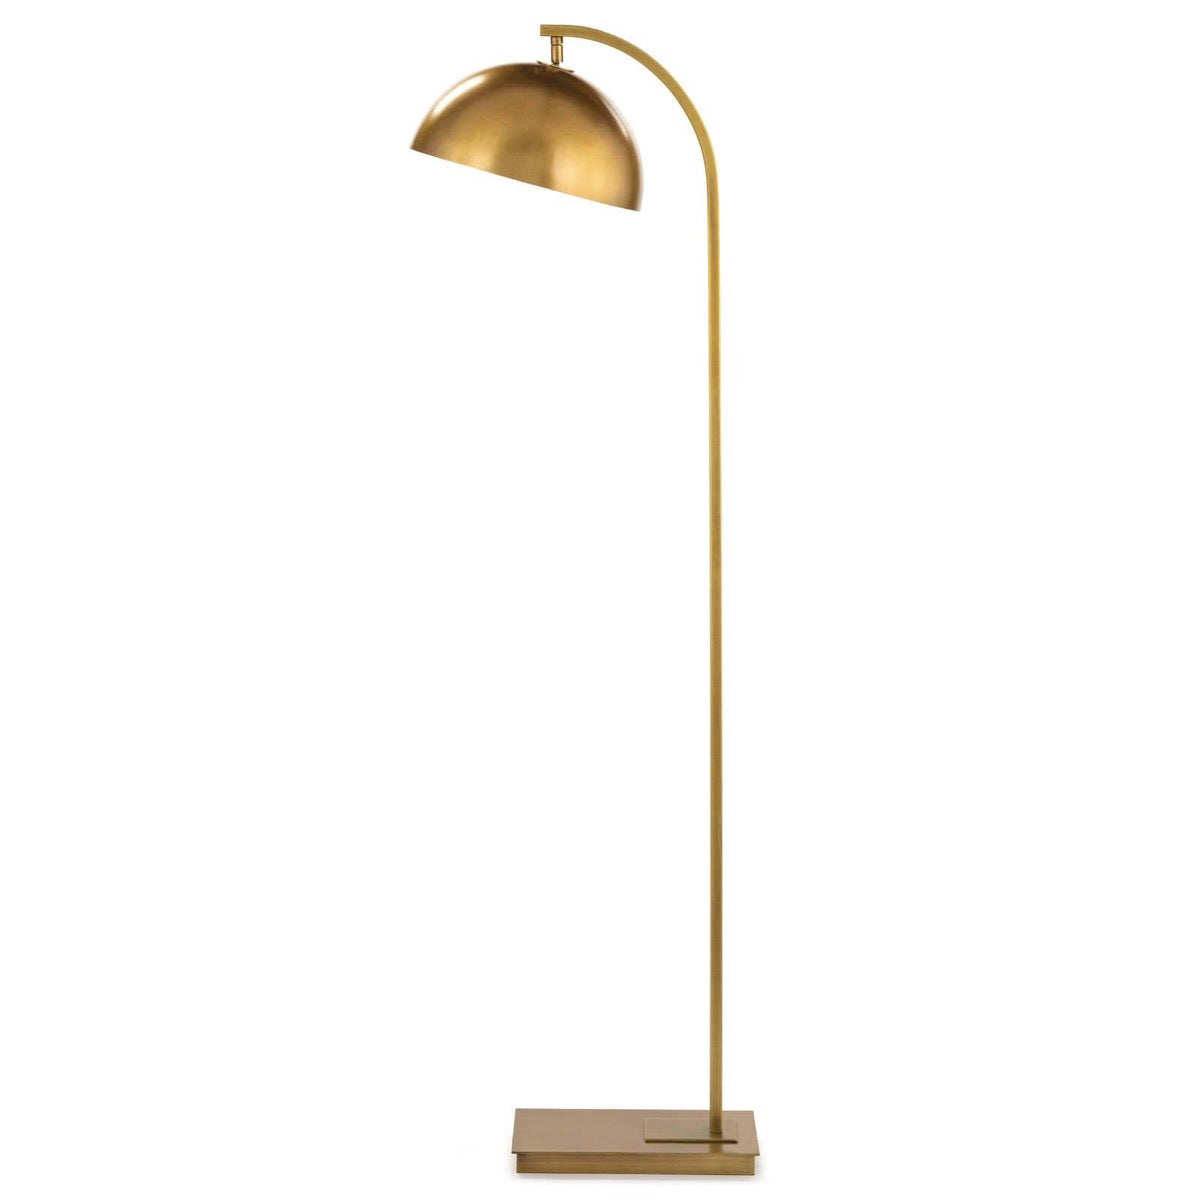 Harwich Floor Lamp Natural Brass. Left side view.